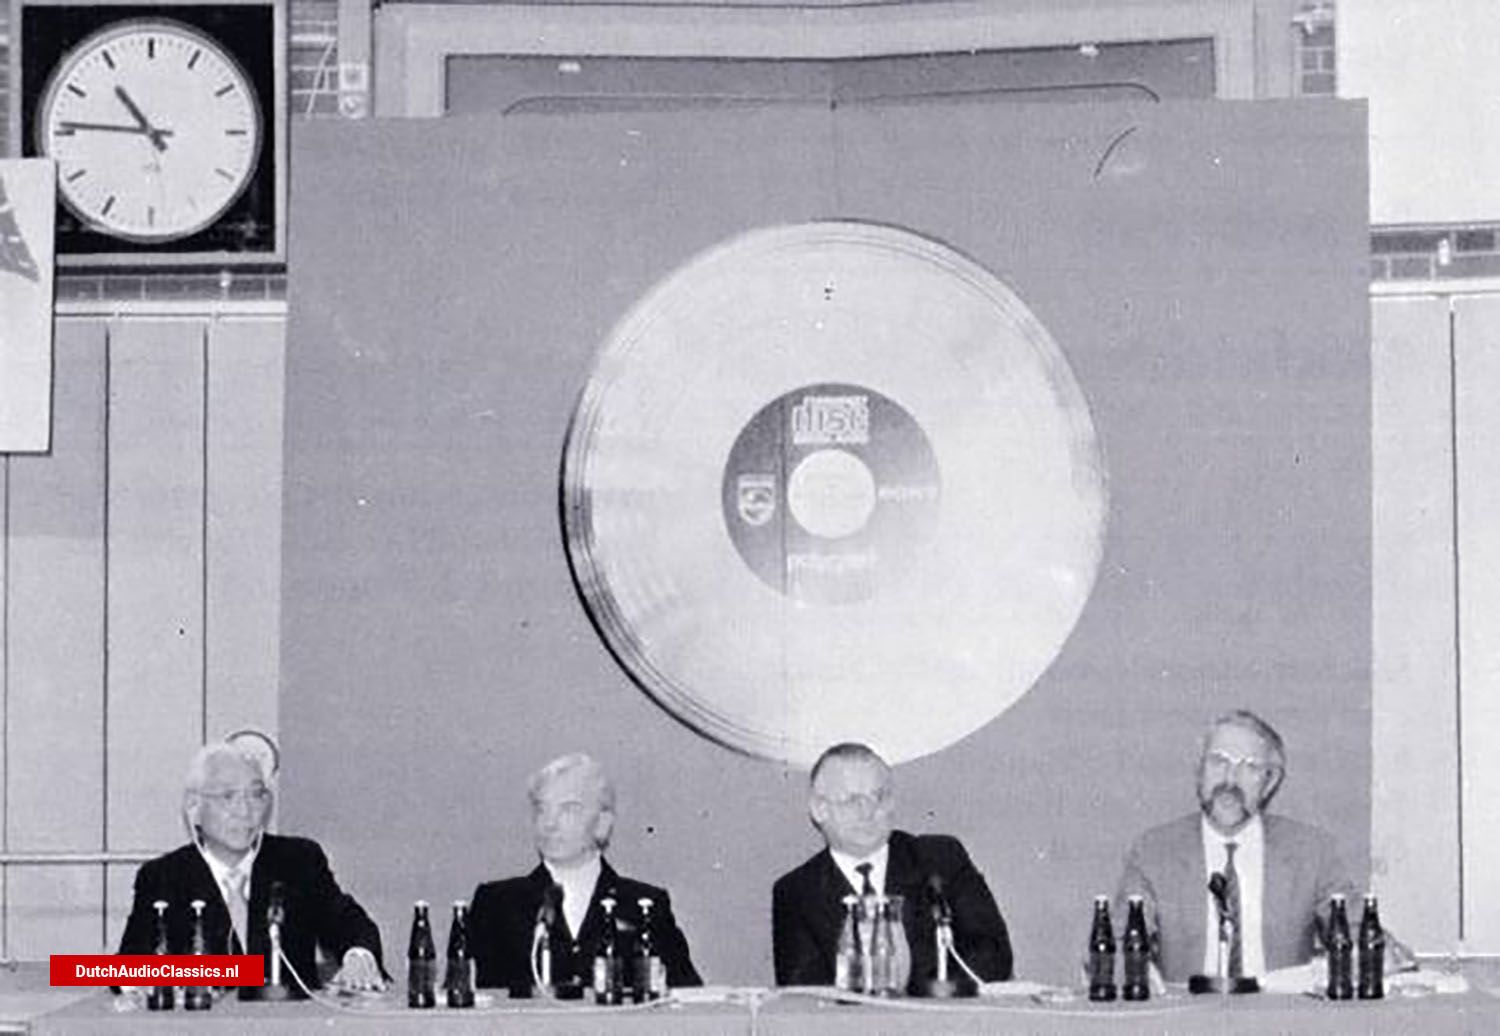 Presenting the Compact Disc in Salzburg